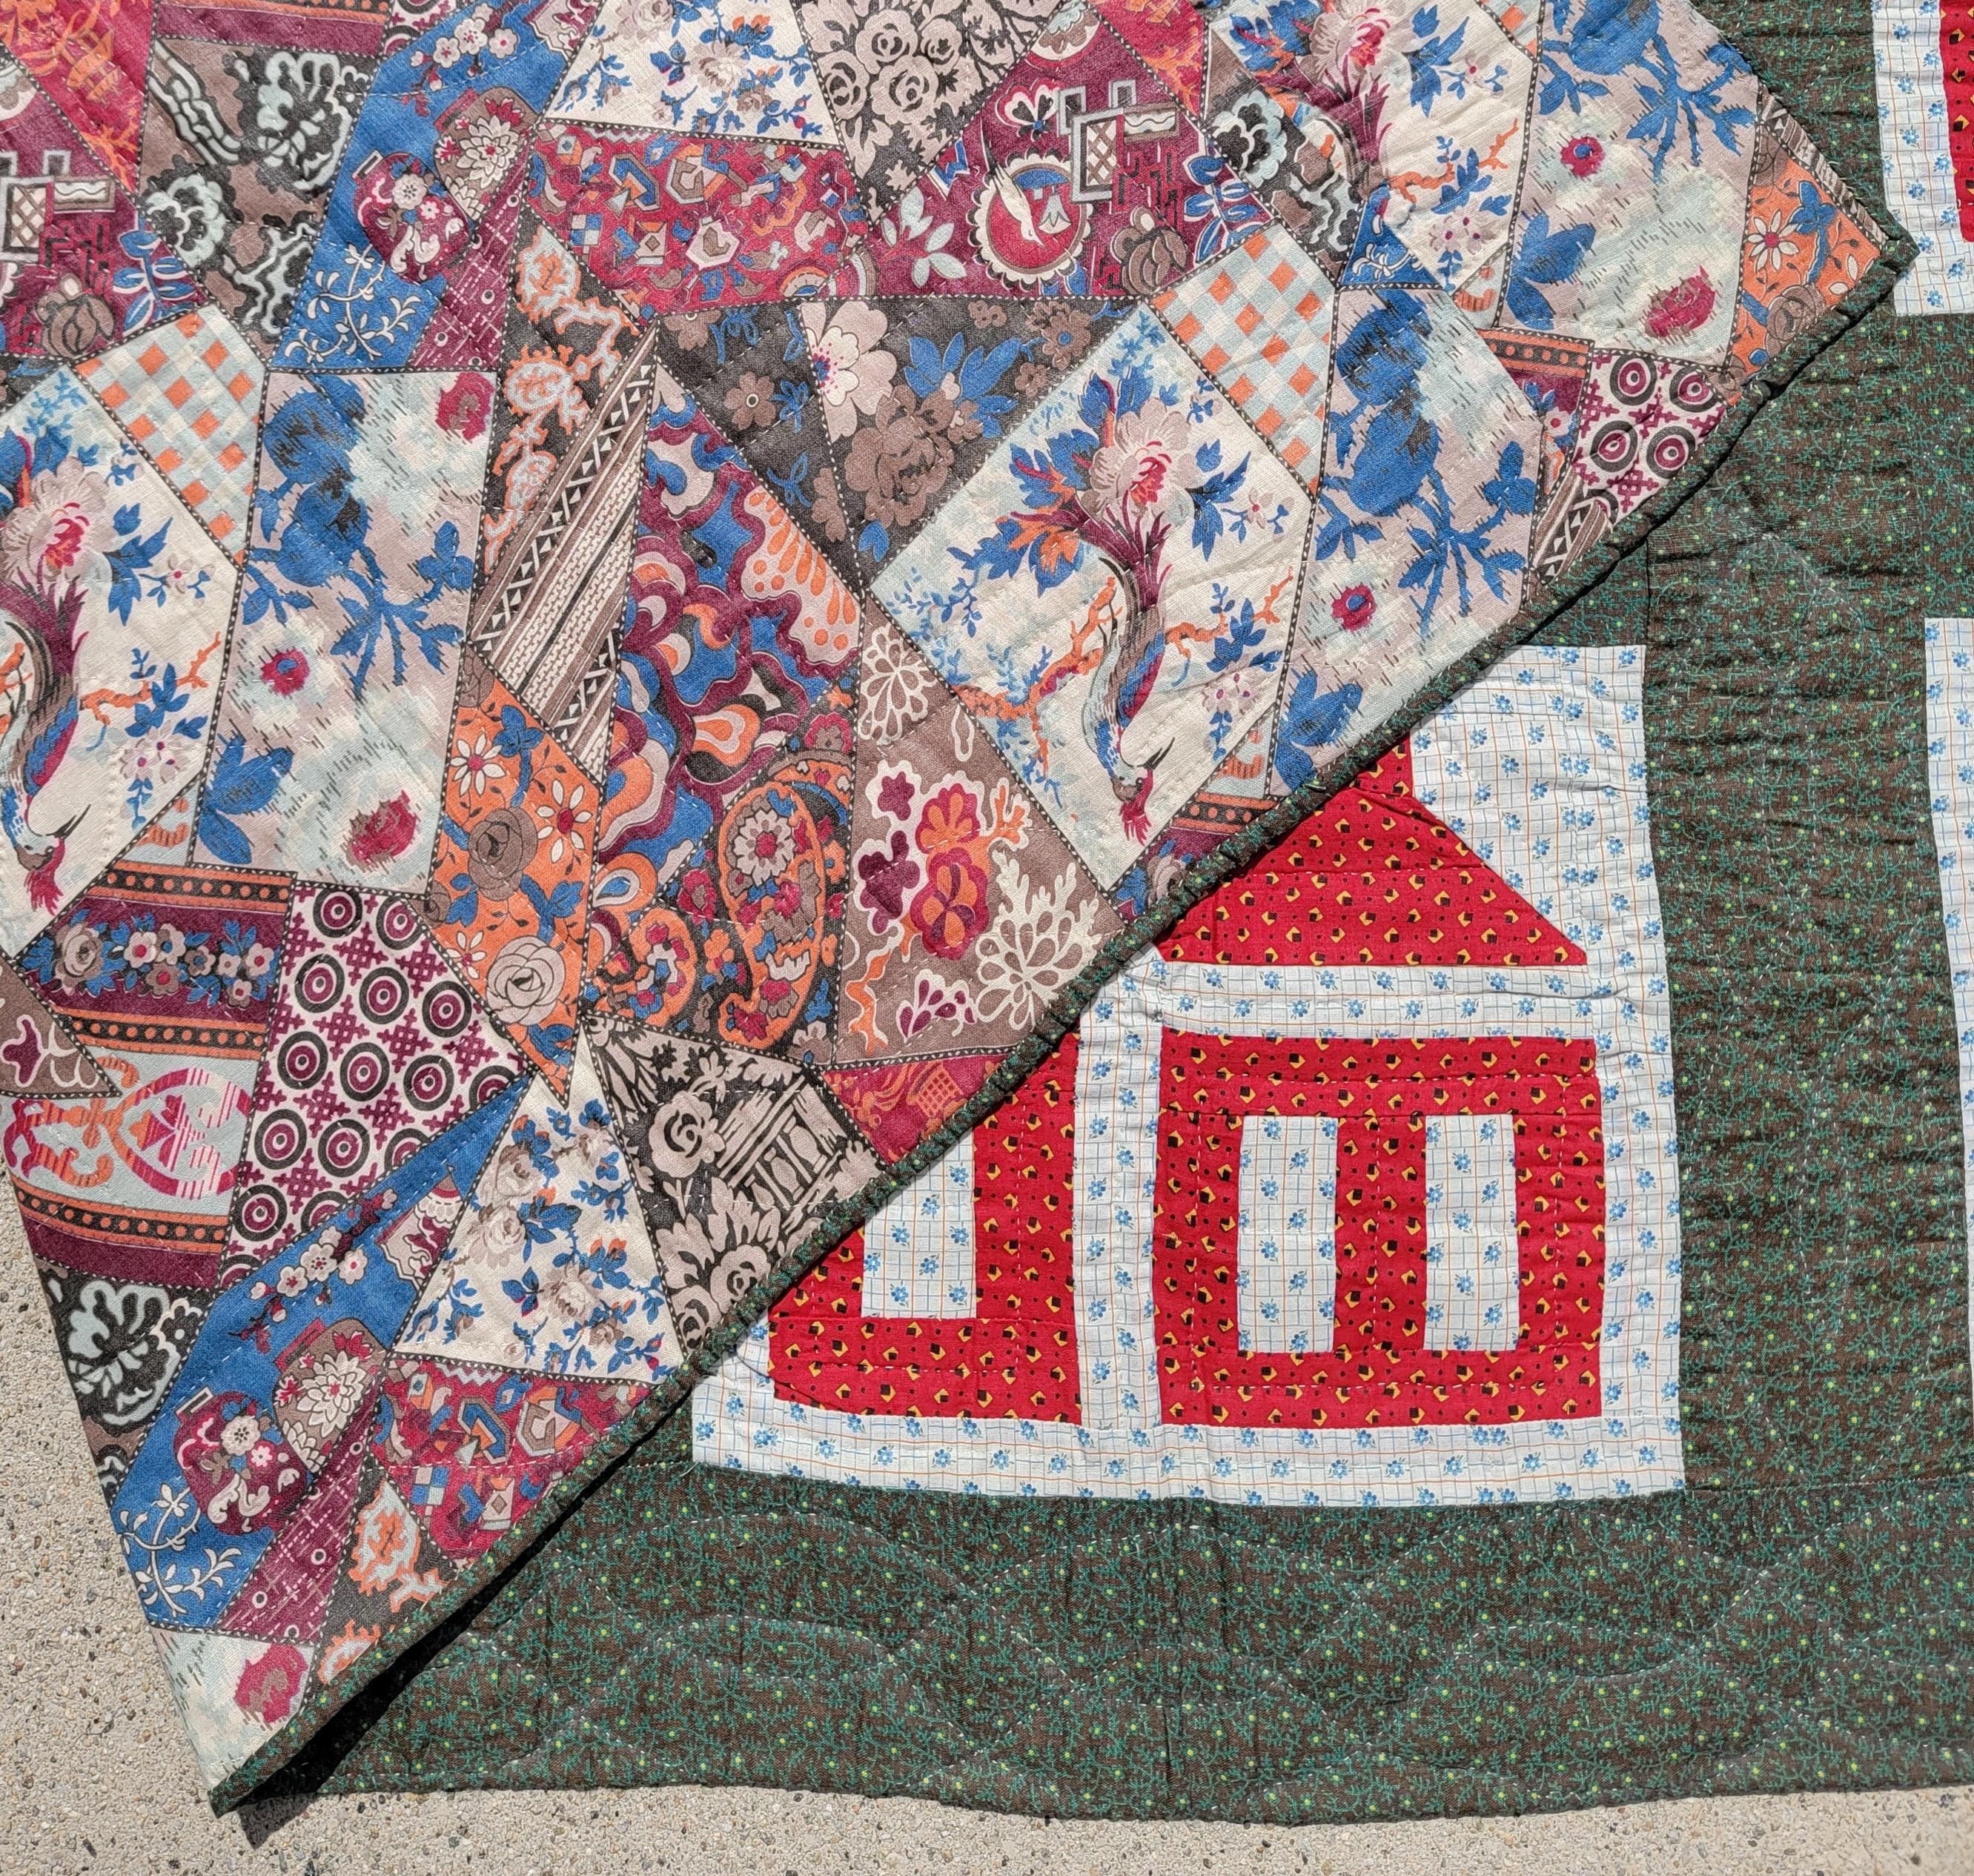 Hand-Crafted 19thc Schoolhouse Quilt From Pennsylvania For Sale